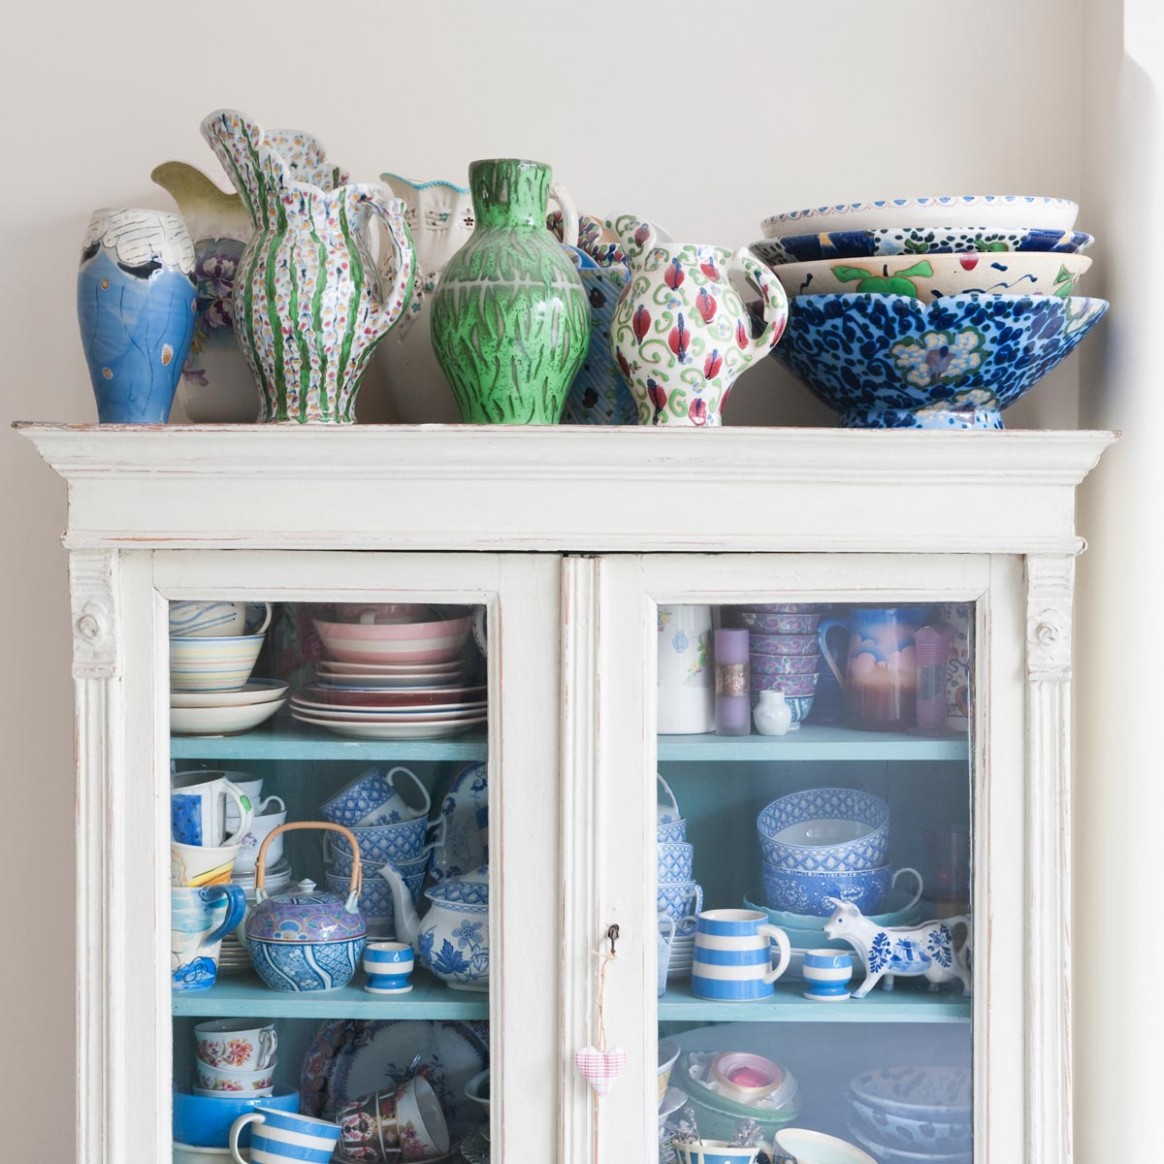 How To Paint A China Cabinet With Chalk Paint | Family Handyman Can You Use Chalk Paint Over Existing Paint